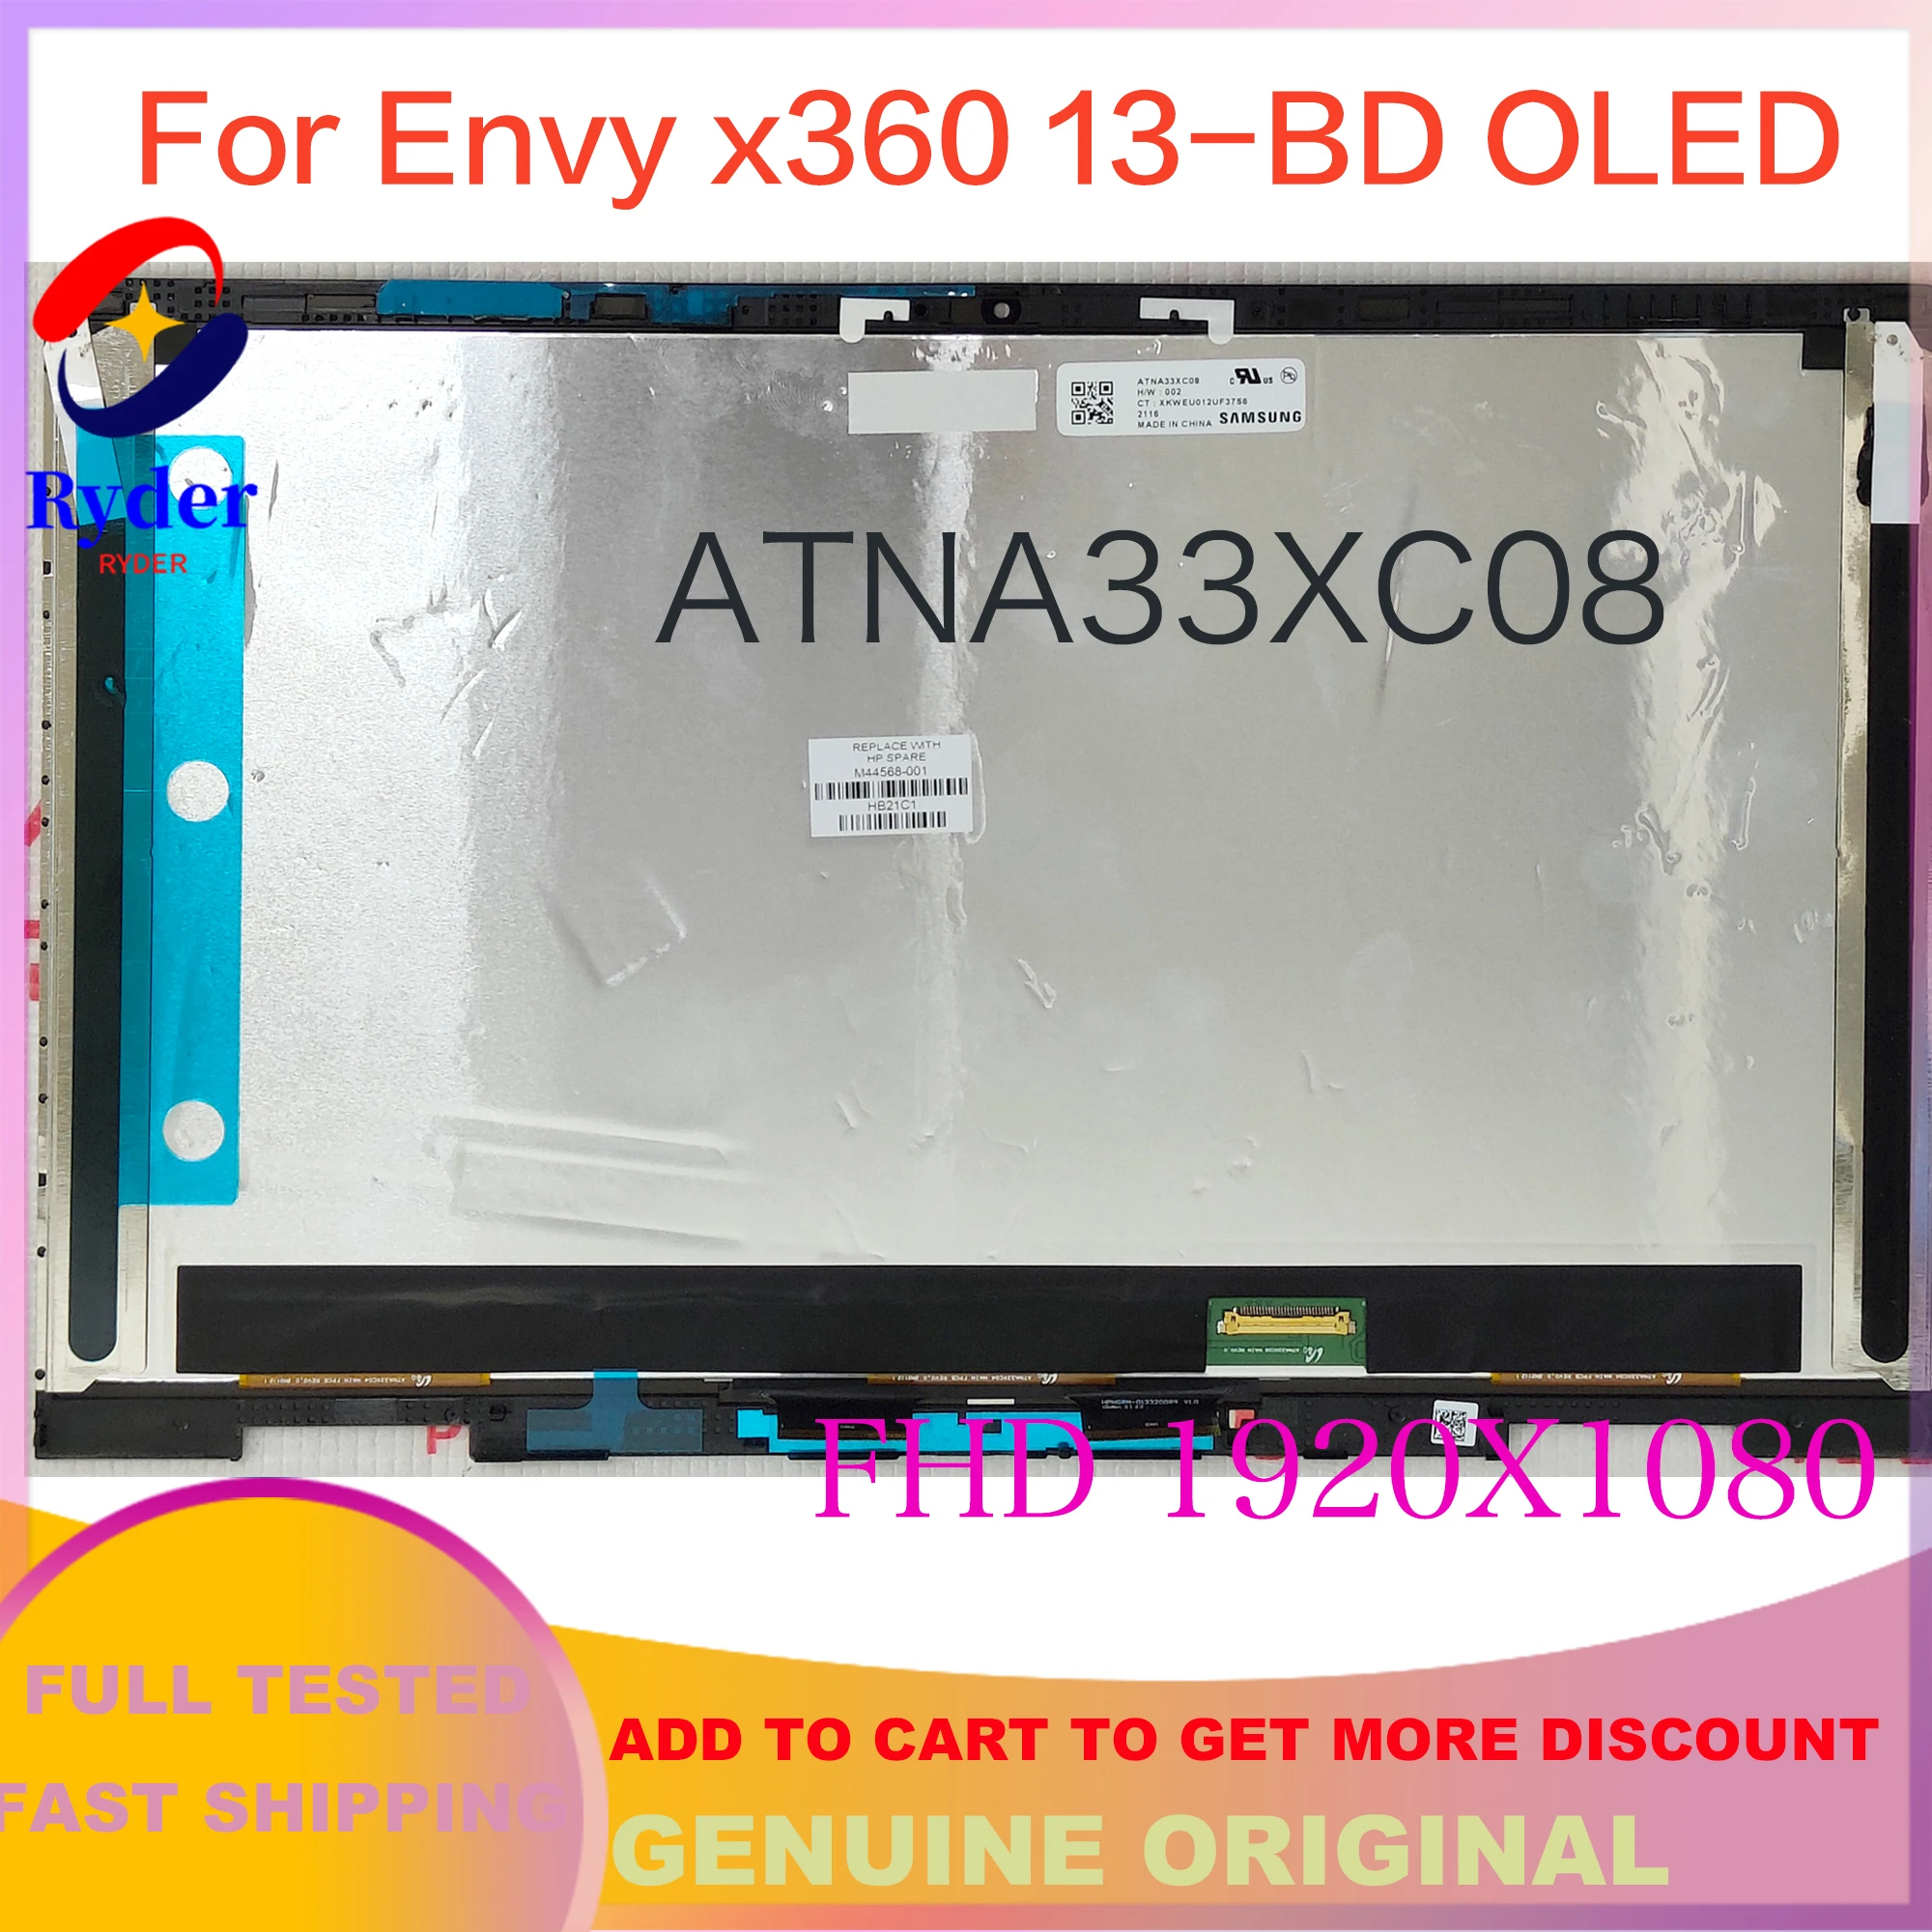 

13.3'' FHD 1920X1080 OLED For HP Envy X360 13-bd Touch LED LCD Screen Assembly 13m-bd0033dx 13m-bd0023dx 13-ay0028ur ATNA33XC08